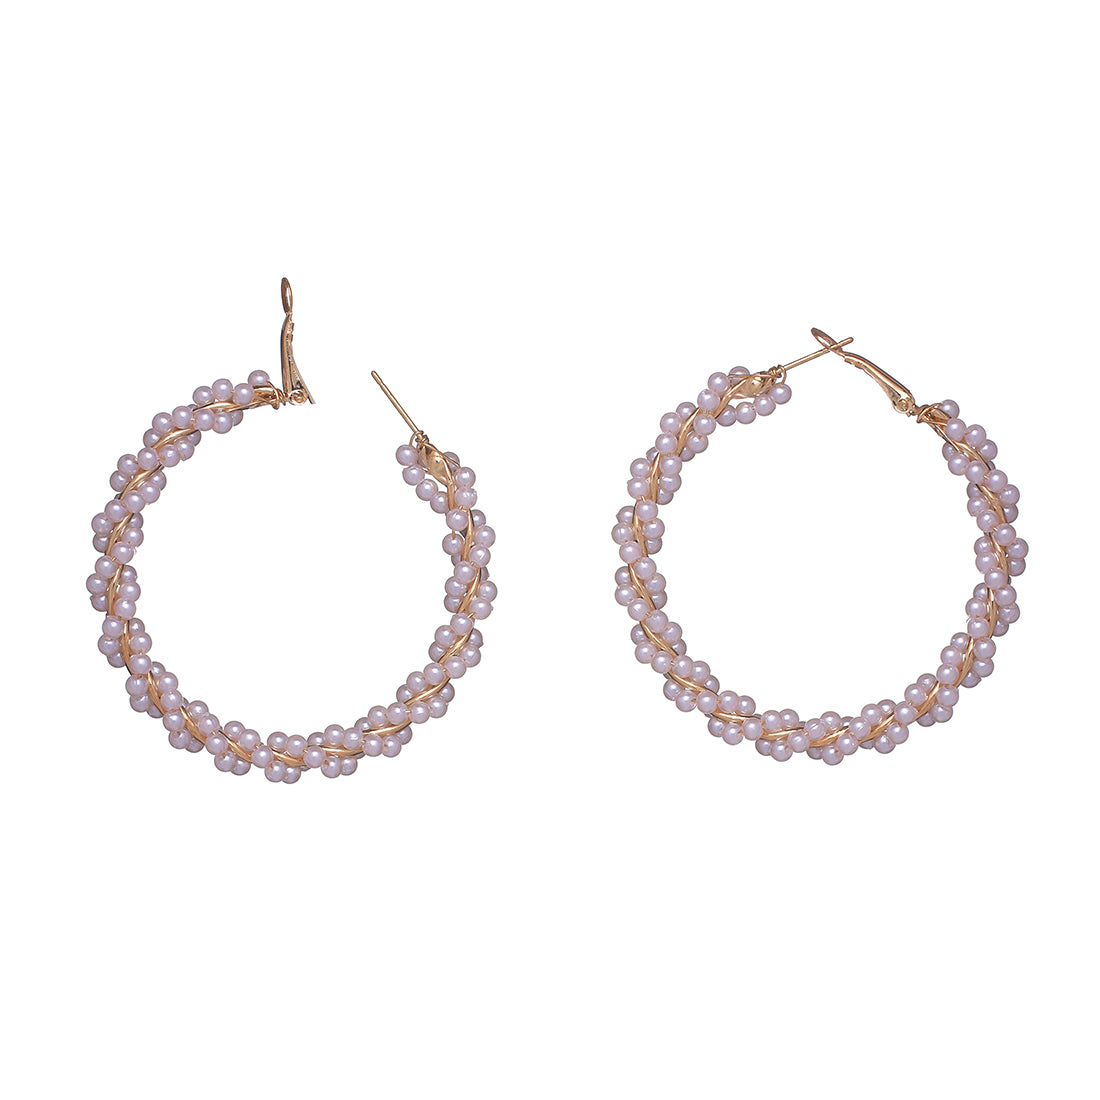 Oversized Pearl Studded Gold-Toned Circular Hoop Earrings